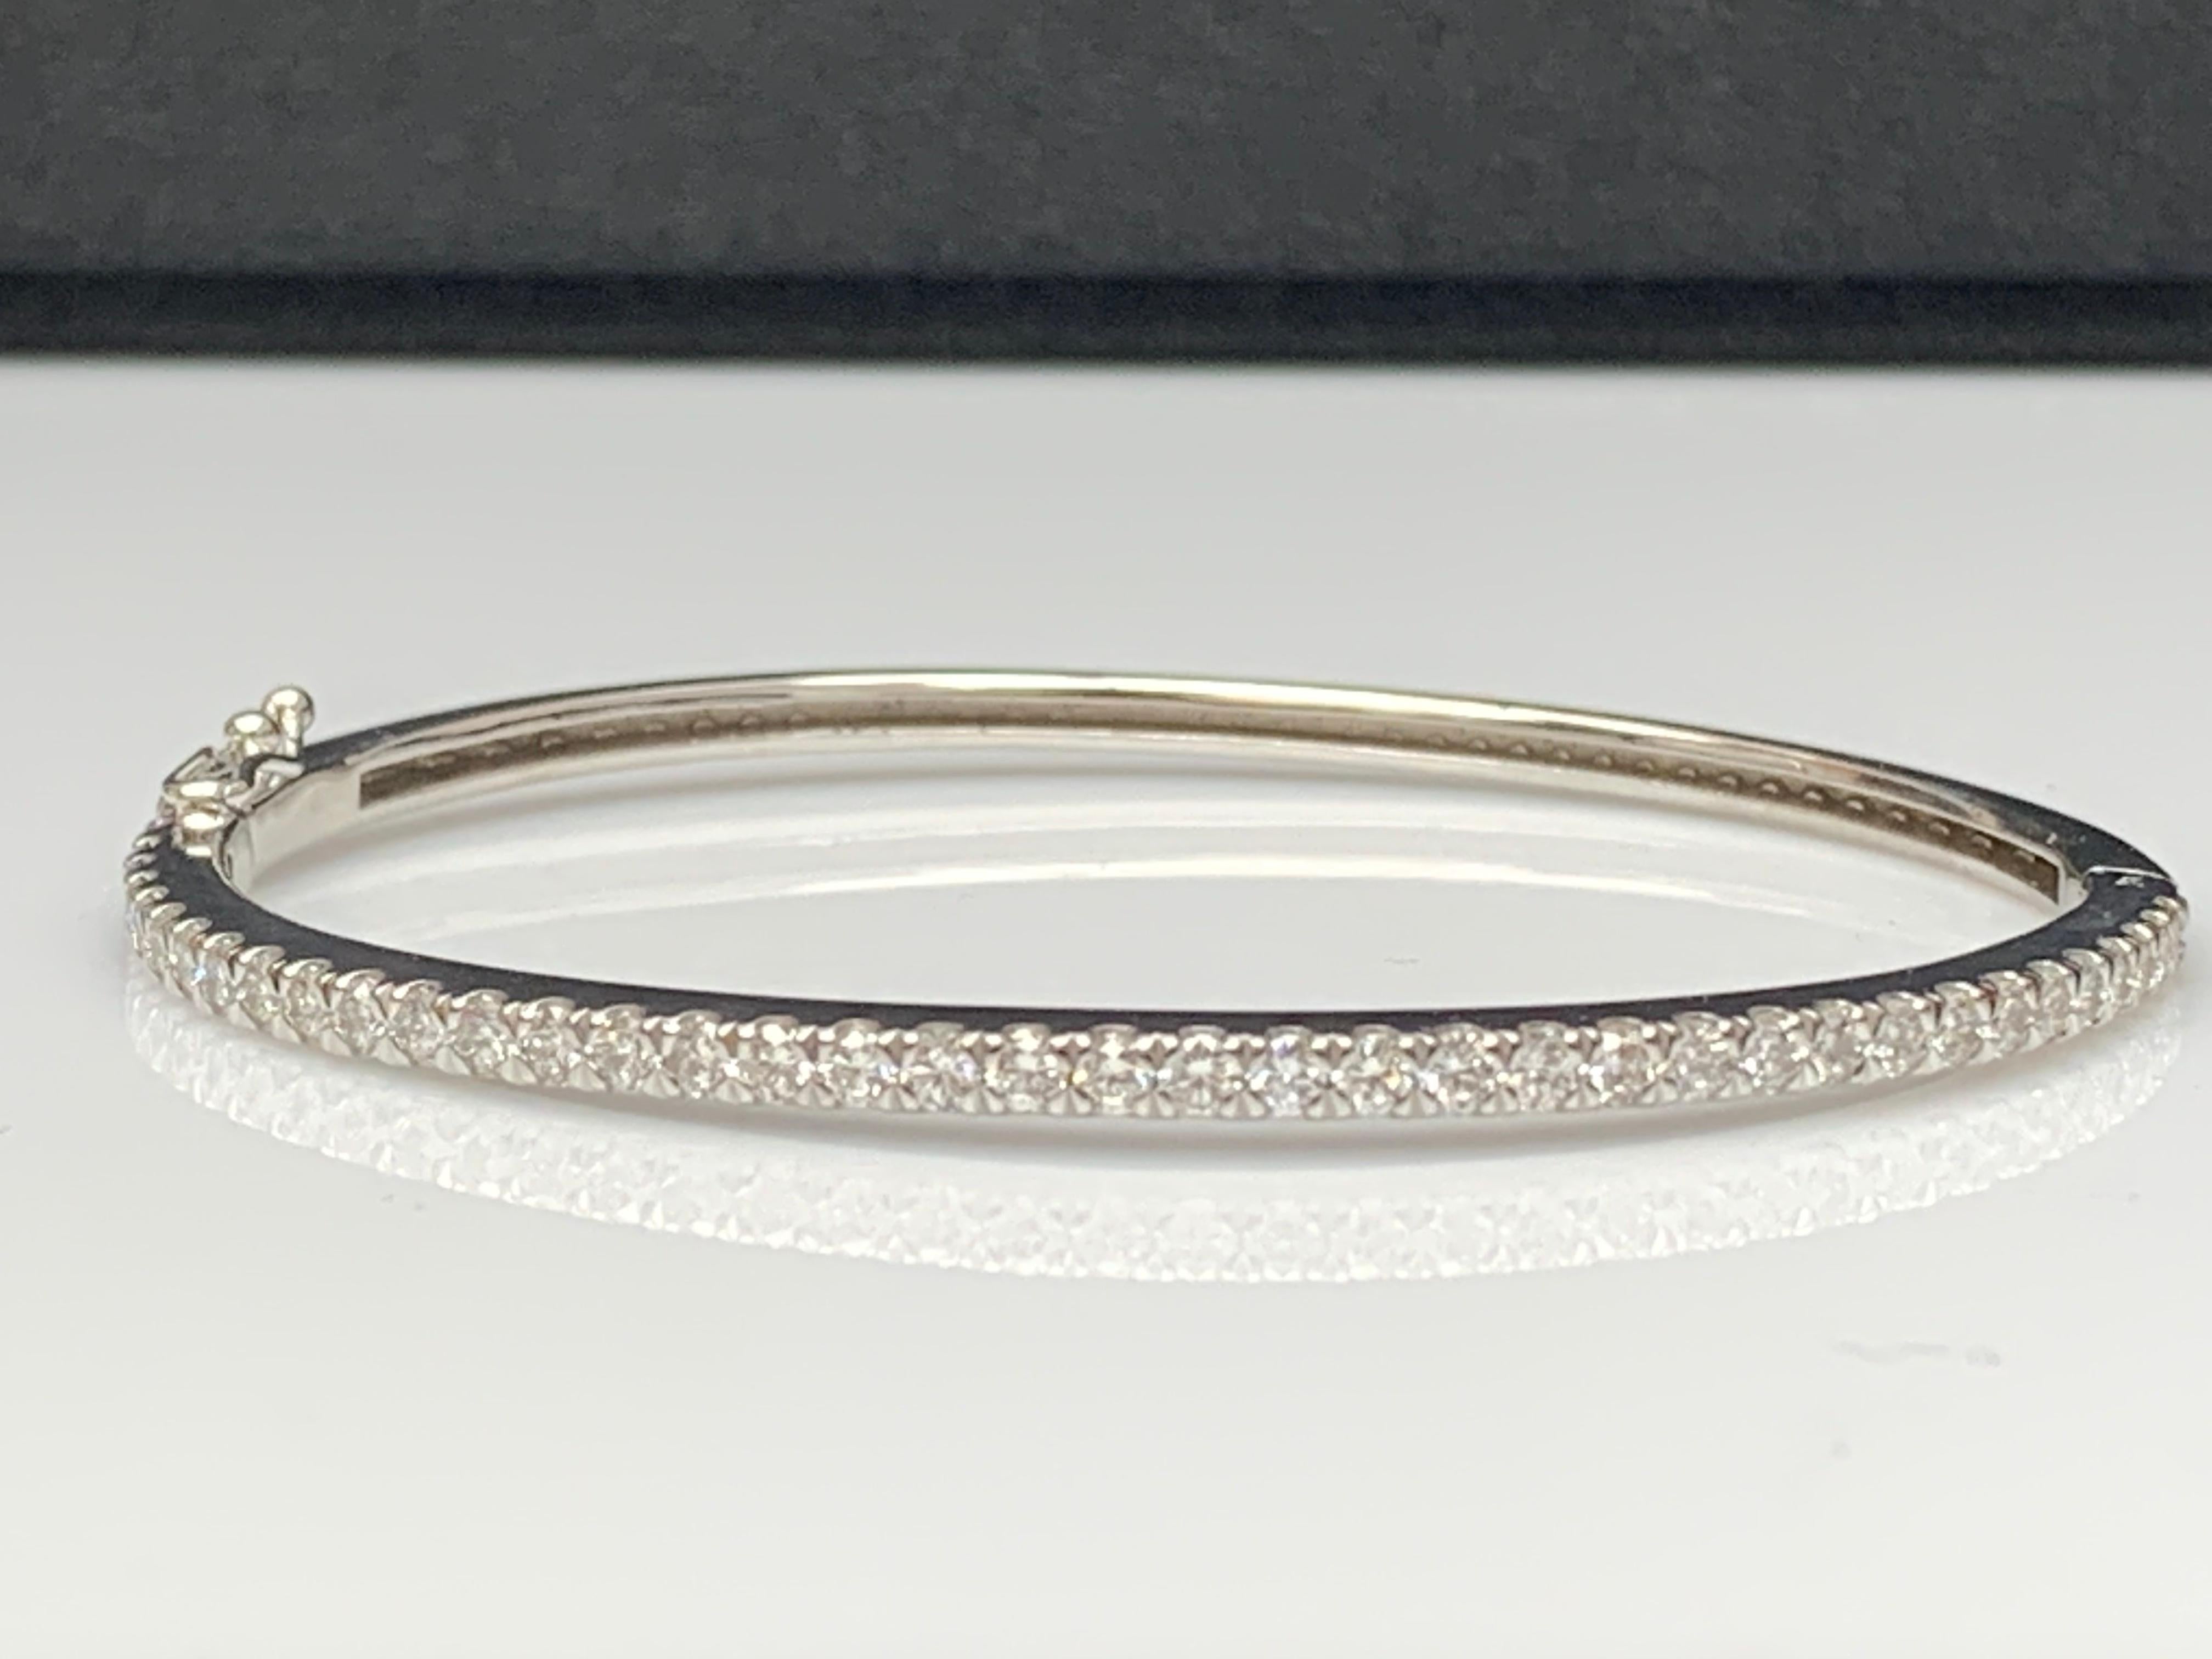 A stunning bangle bracelet set with 39 brilliant cut diamonds weighing 1.78 carat total. Set in polished 14k white gold. Double lock mechanism for maximum security. A simple yet dazzling piece.

All diamonds are GH color SI1 Clarity.
Style available